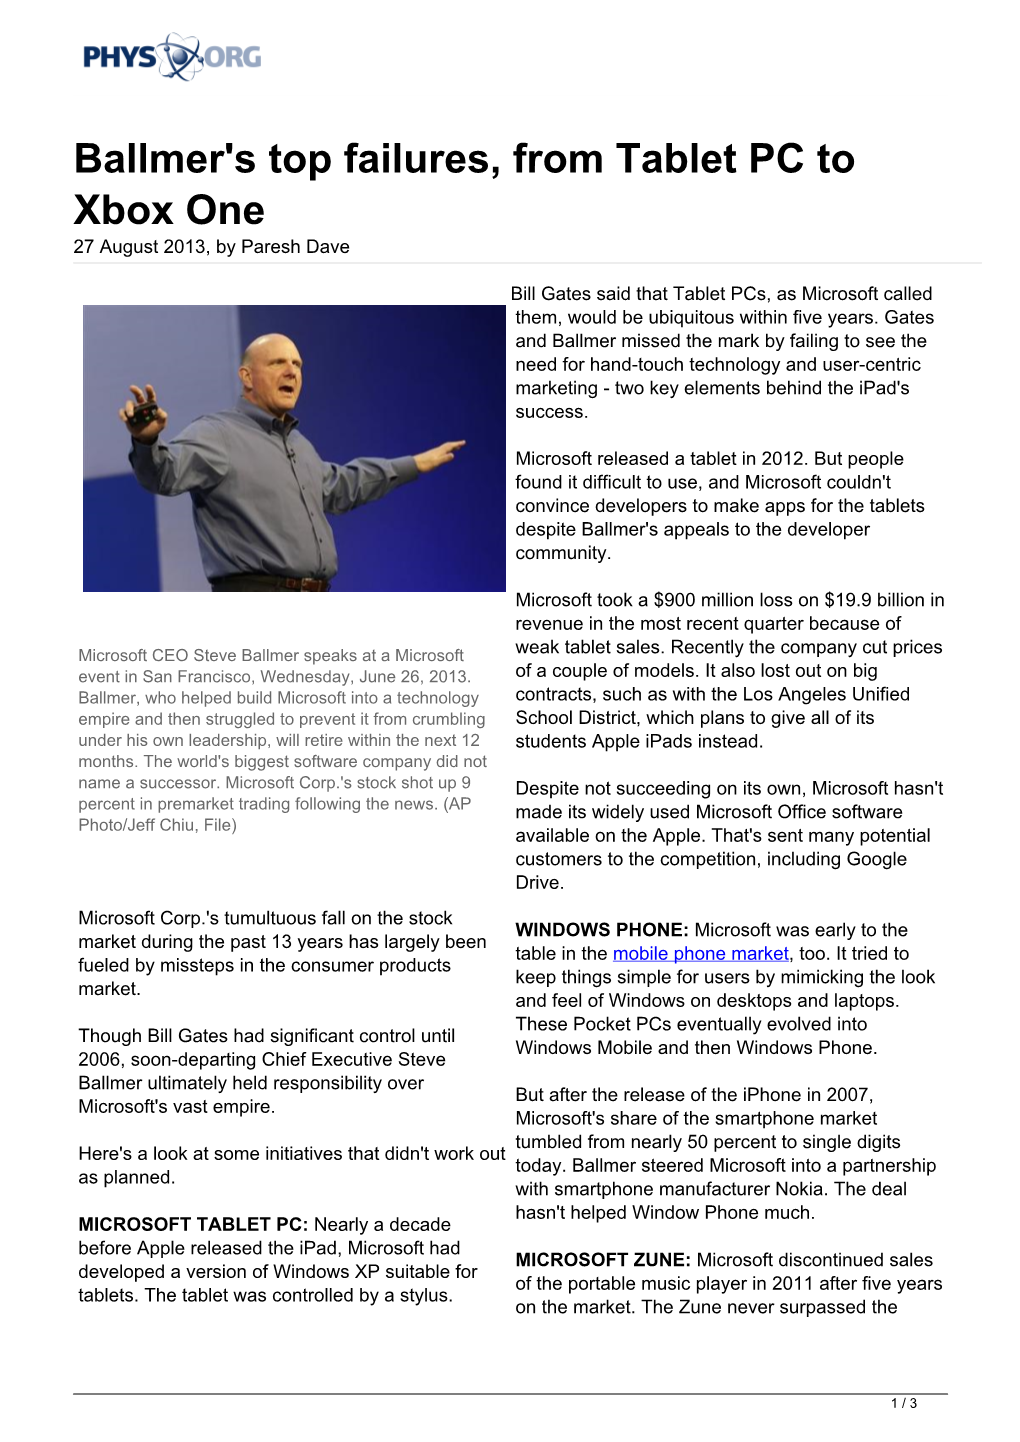 Ballmer's Top Failures, from Tablet PC to Xbox One 27 August 2013, by Paresh Dave